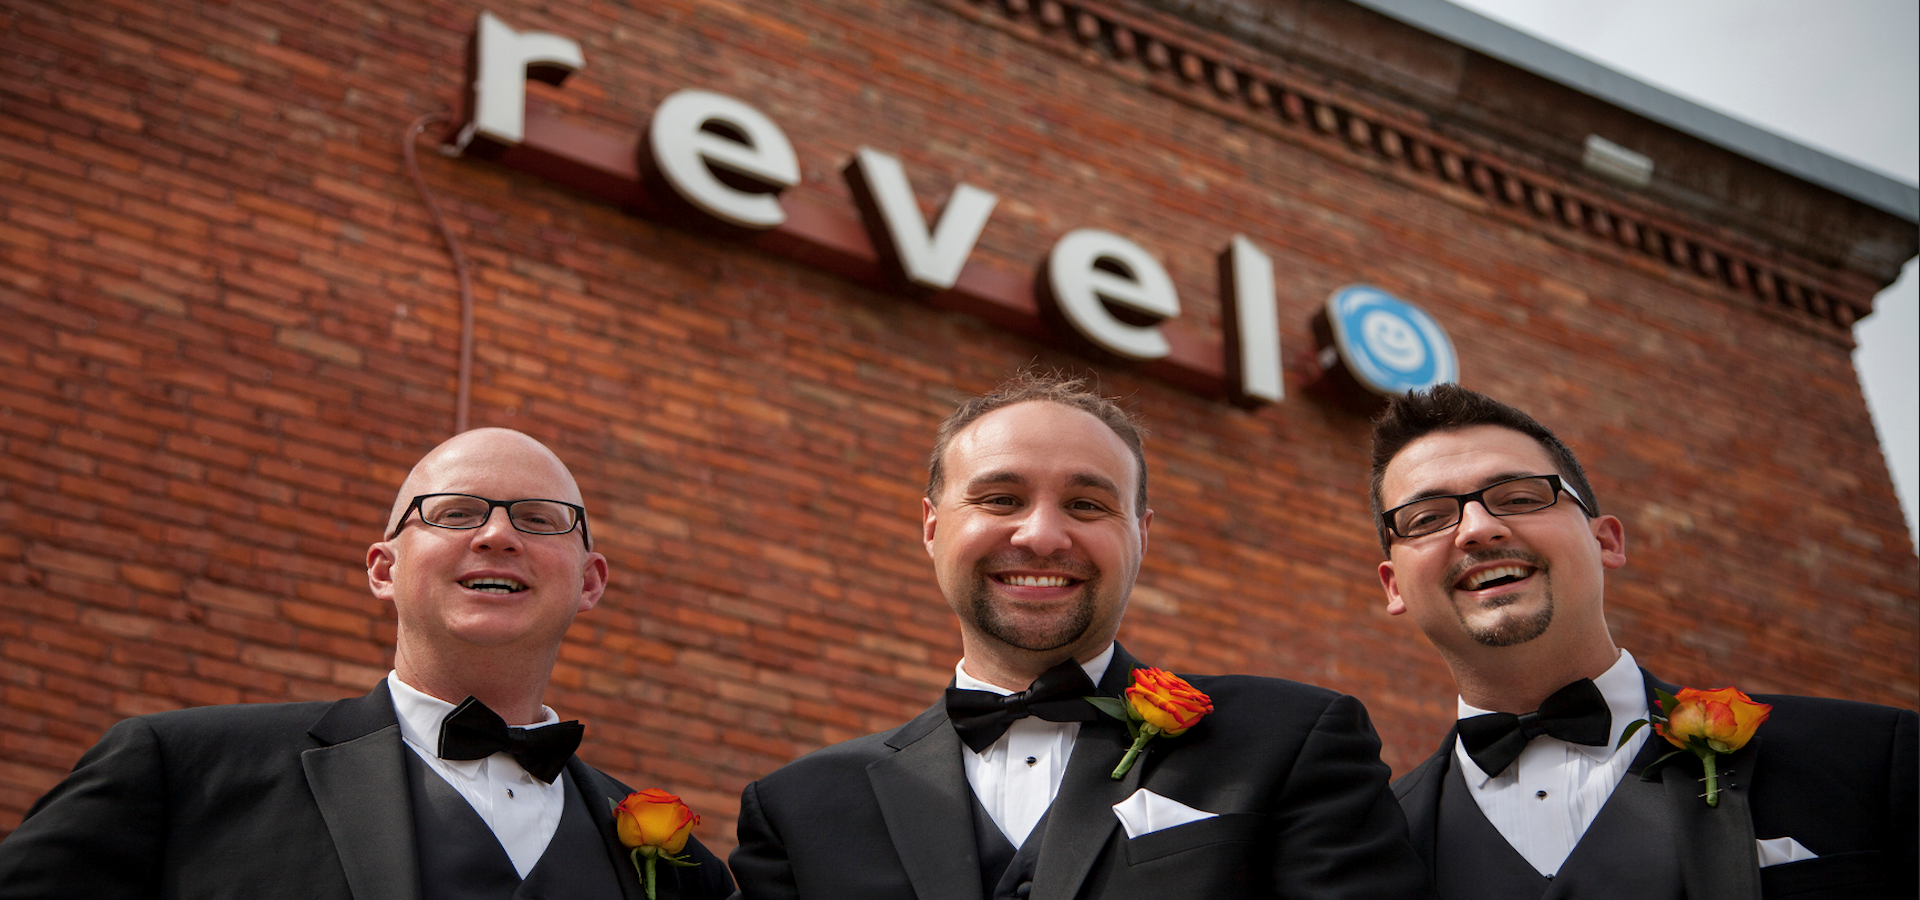 Jason, Andy and Don in front of Revel office